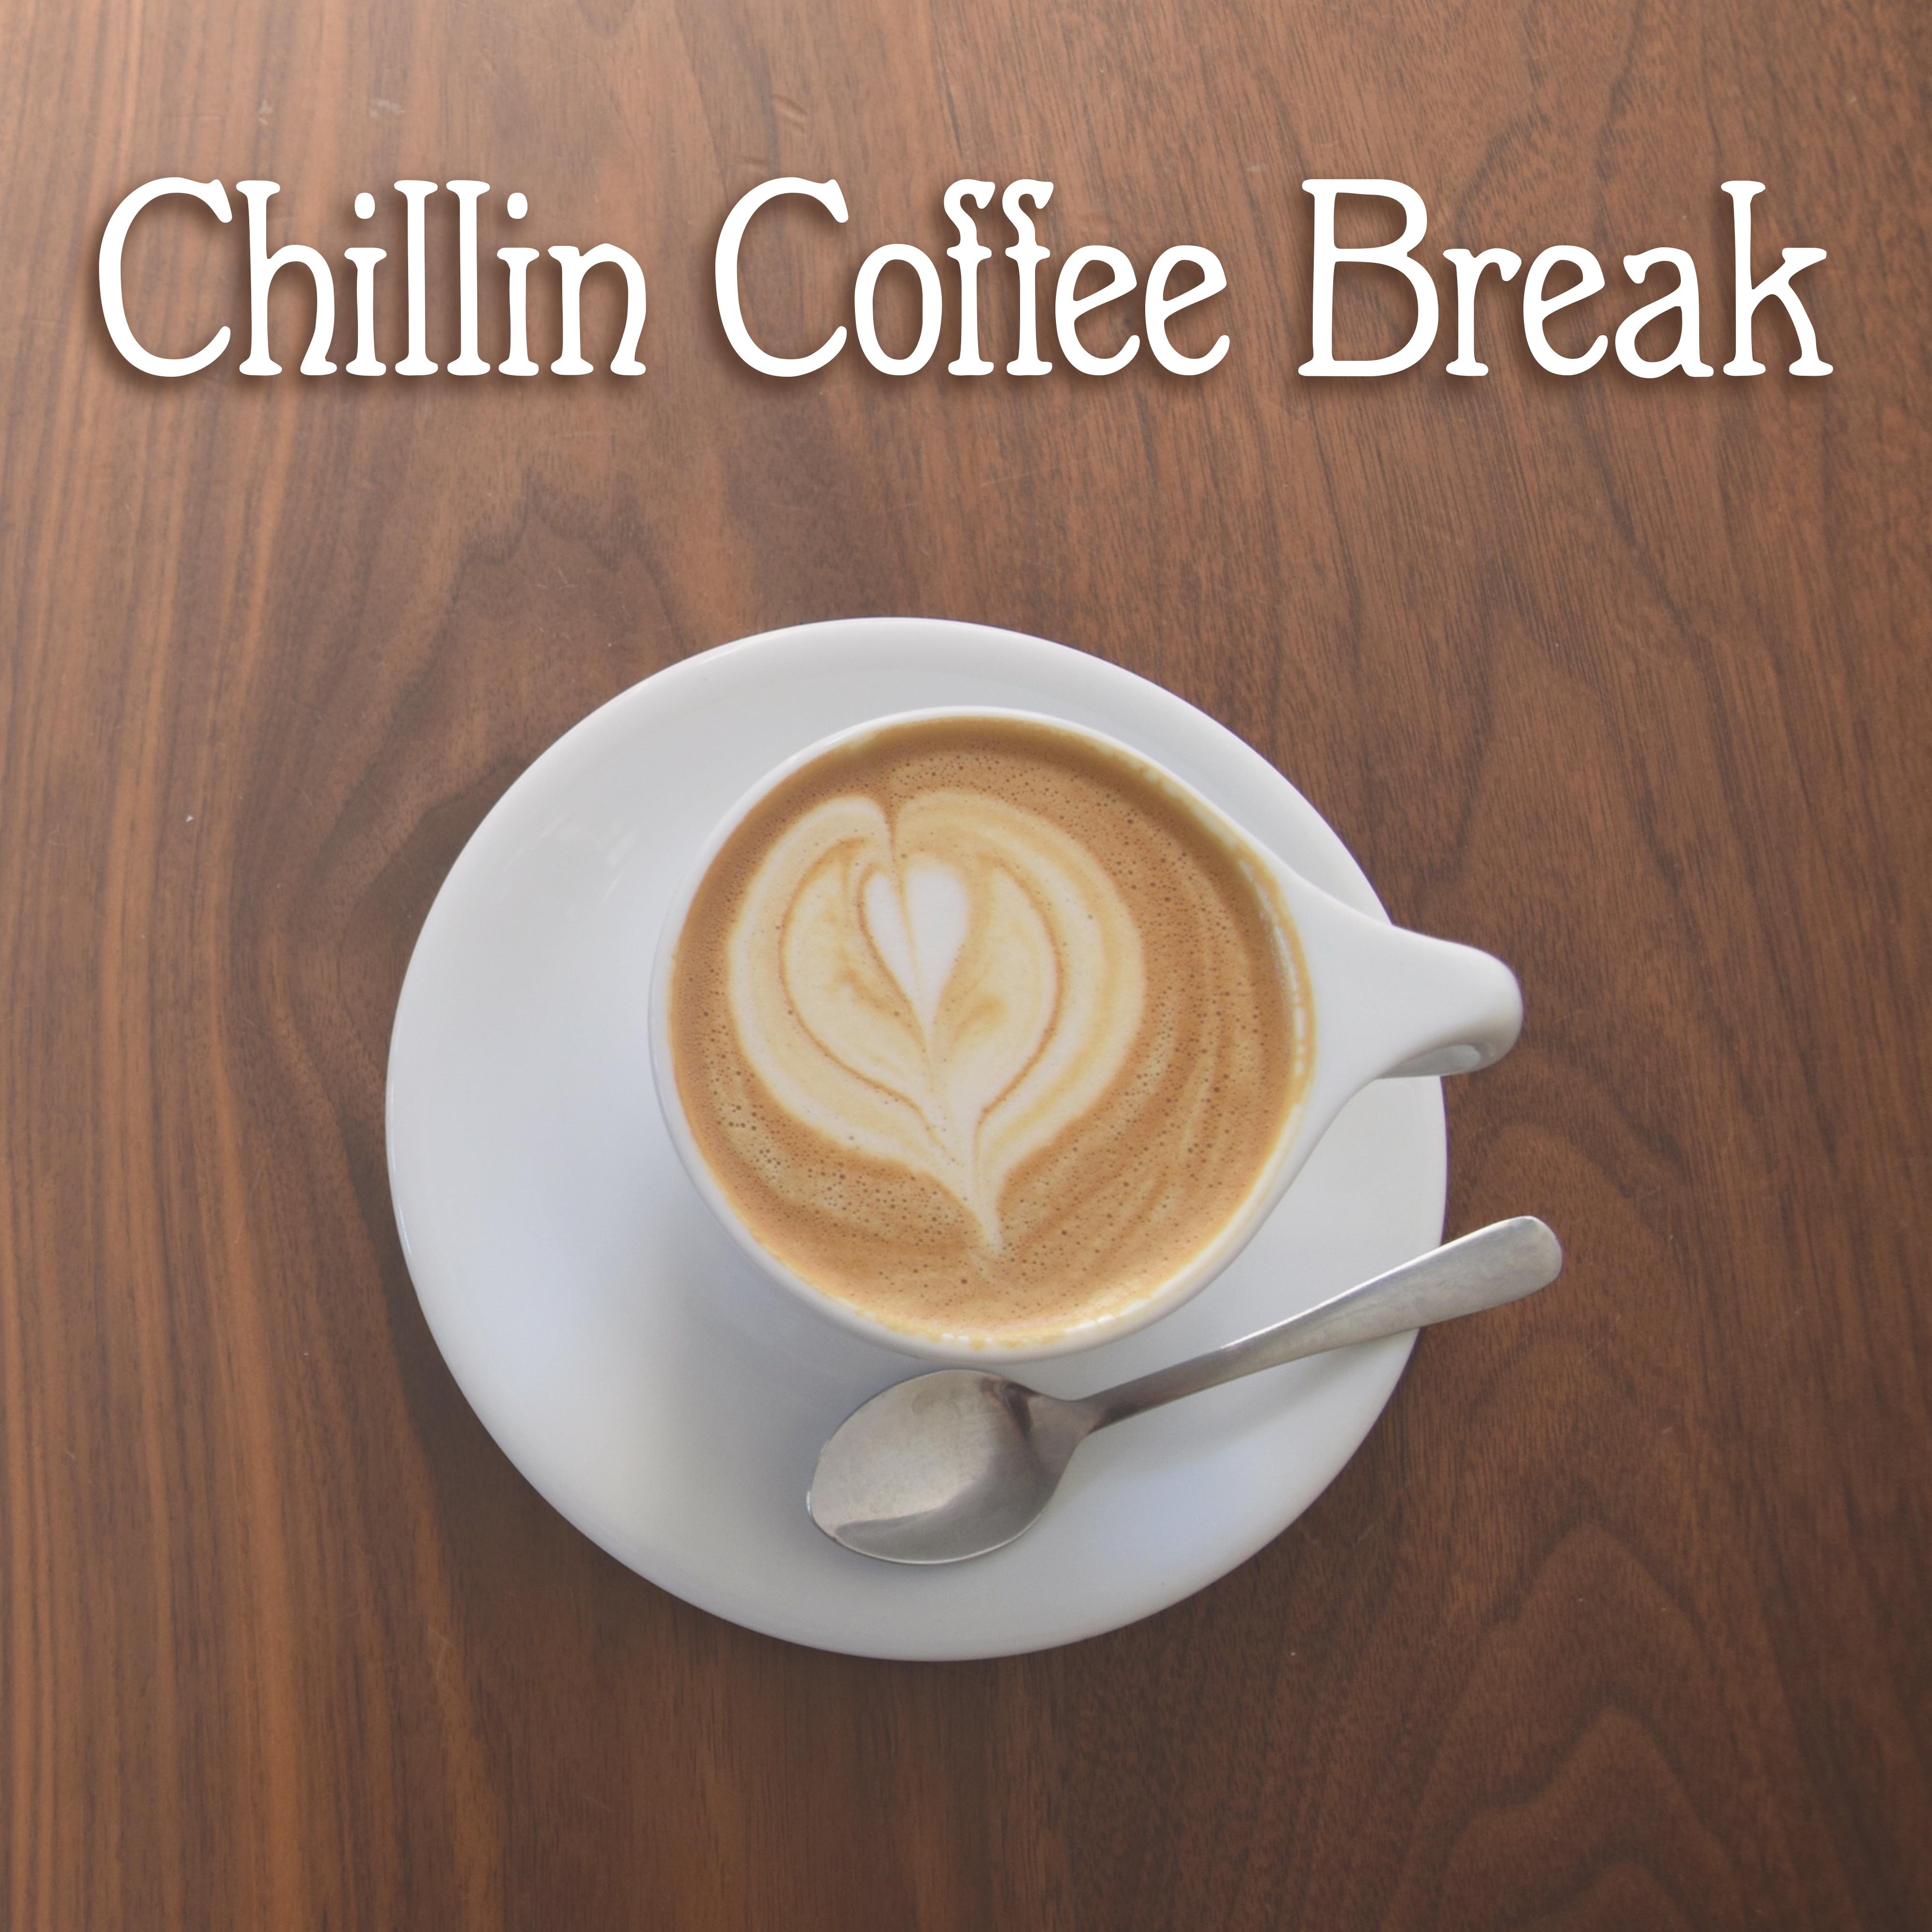 Chillin Coffee Break  Relaxing Chill Out Music, Deep Chillout, Music for Cafe, Hotel Lounge